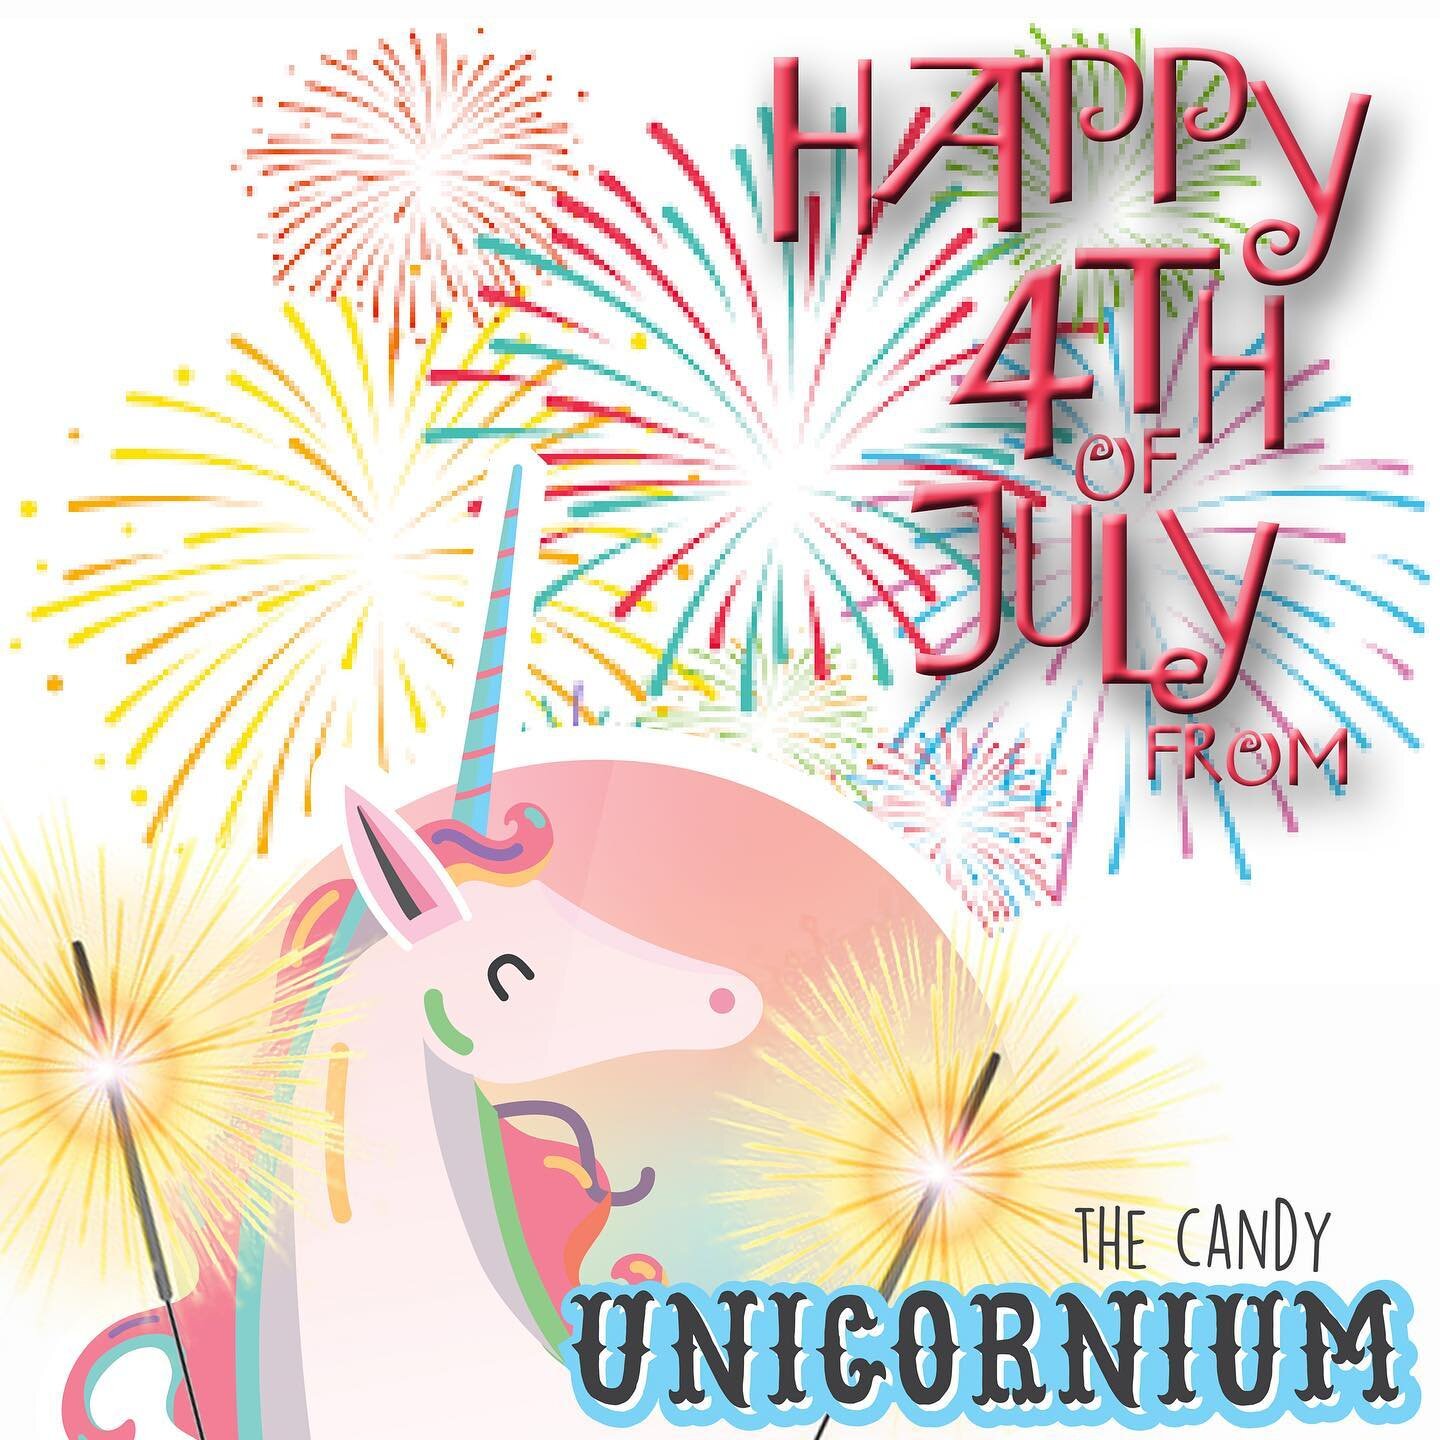 🇺🇸 HAPPY 4TH OF JULY 🎉!!! 🍭🦄🍫🍬🇺🇸

*The Candy Unicornium is Closed Today! Have A Fabulous Holiday!!!!* 🇺🇸 #HappyFourthOfJuly #happyindependenceday #🇺🇸 #TheCandyUnicornium #CandyShoppe #candystore #candycandy #candy #unicorn #unicorns #the